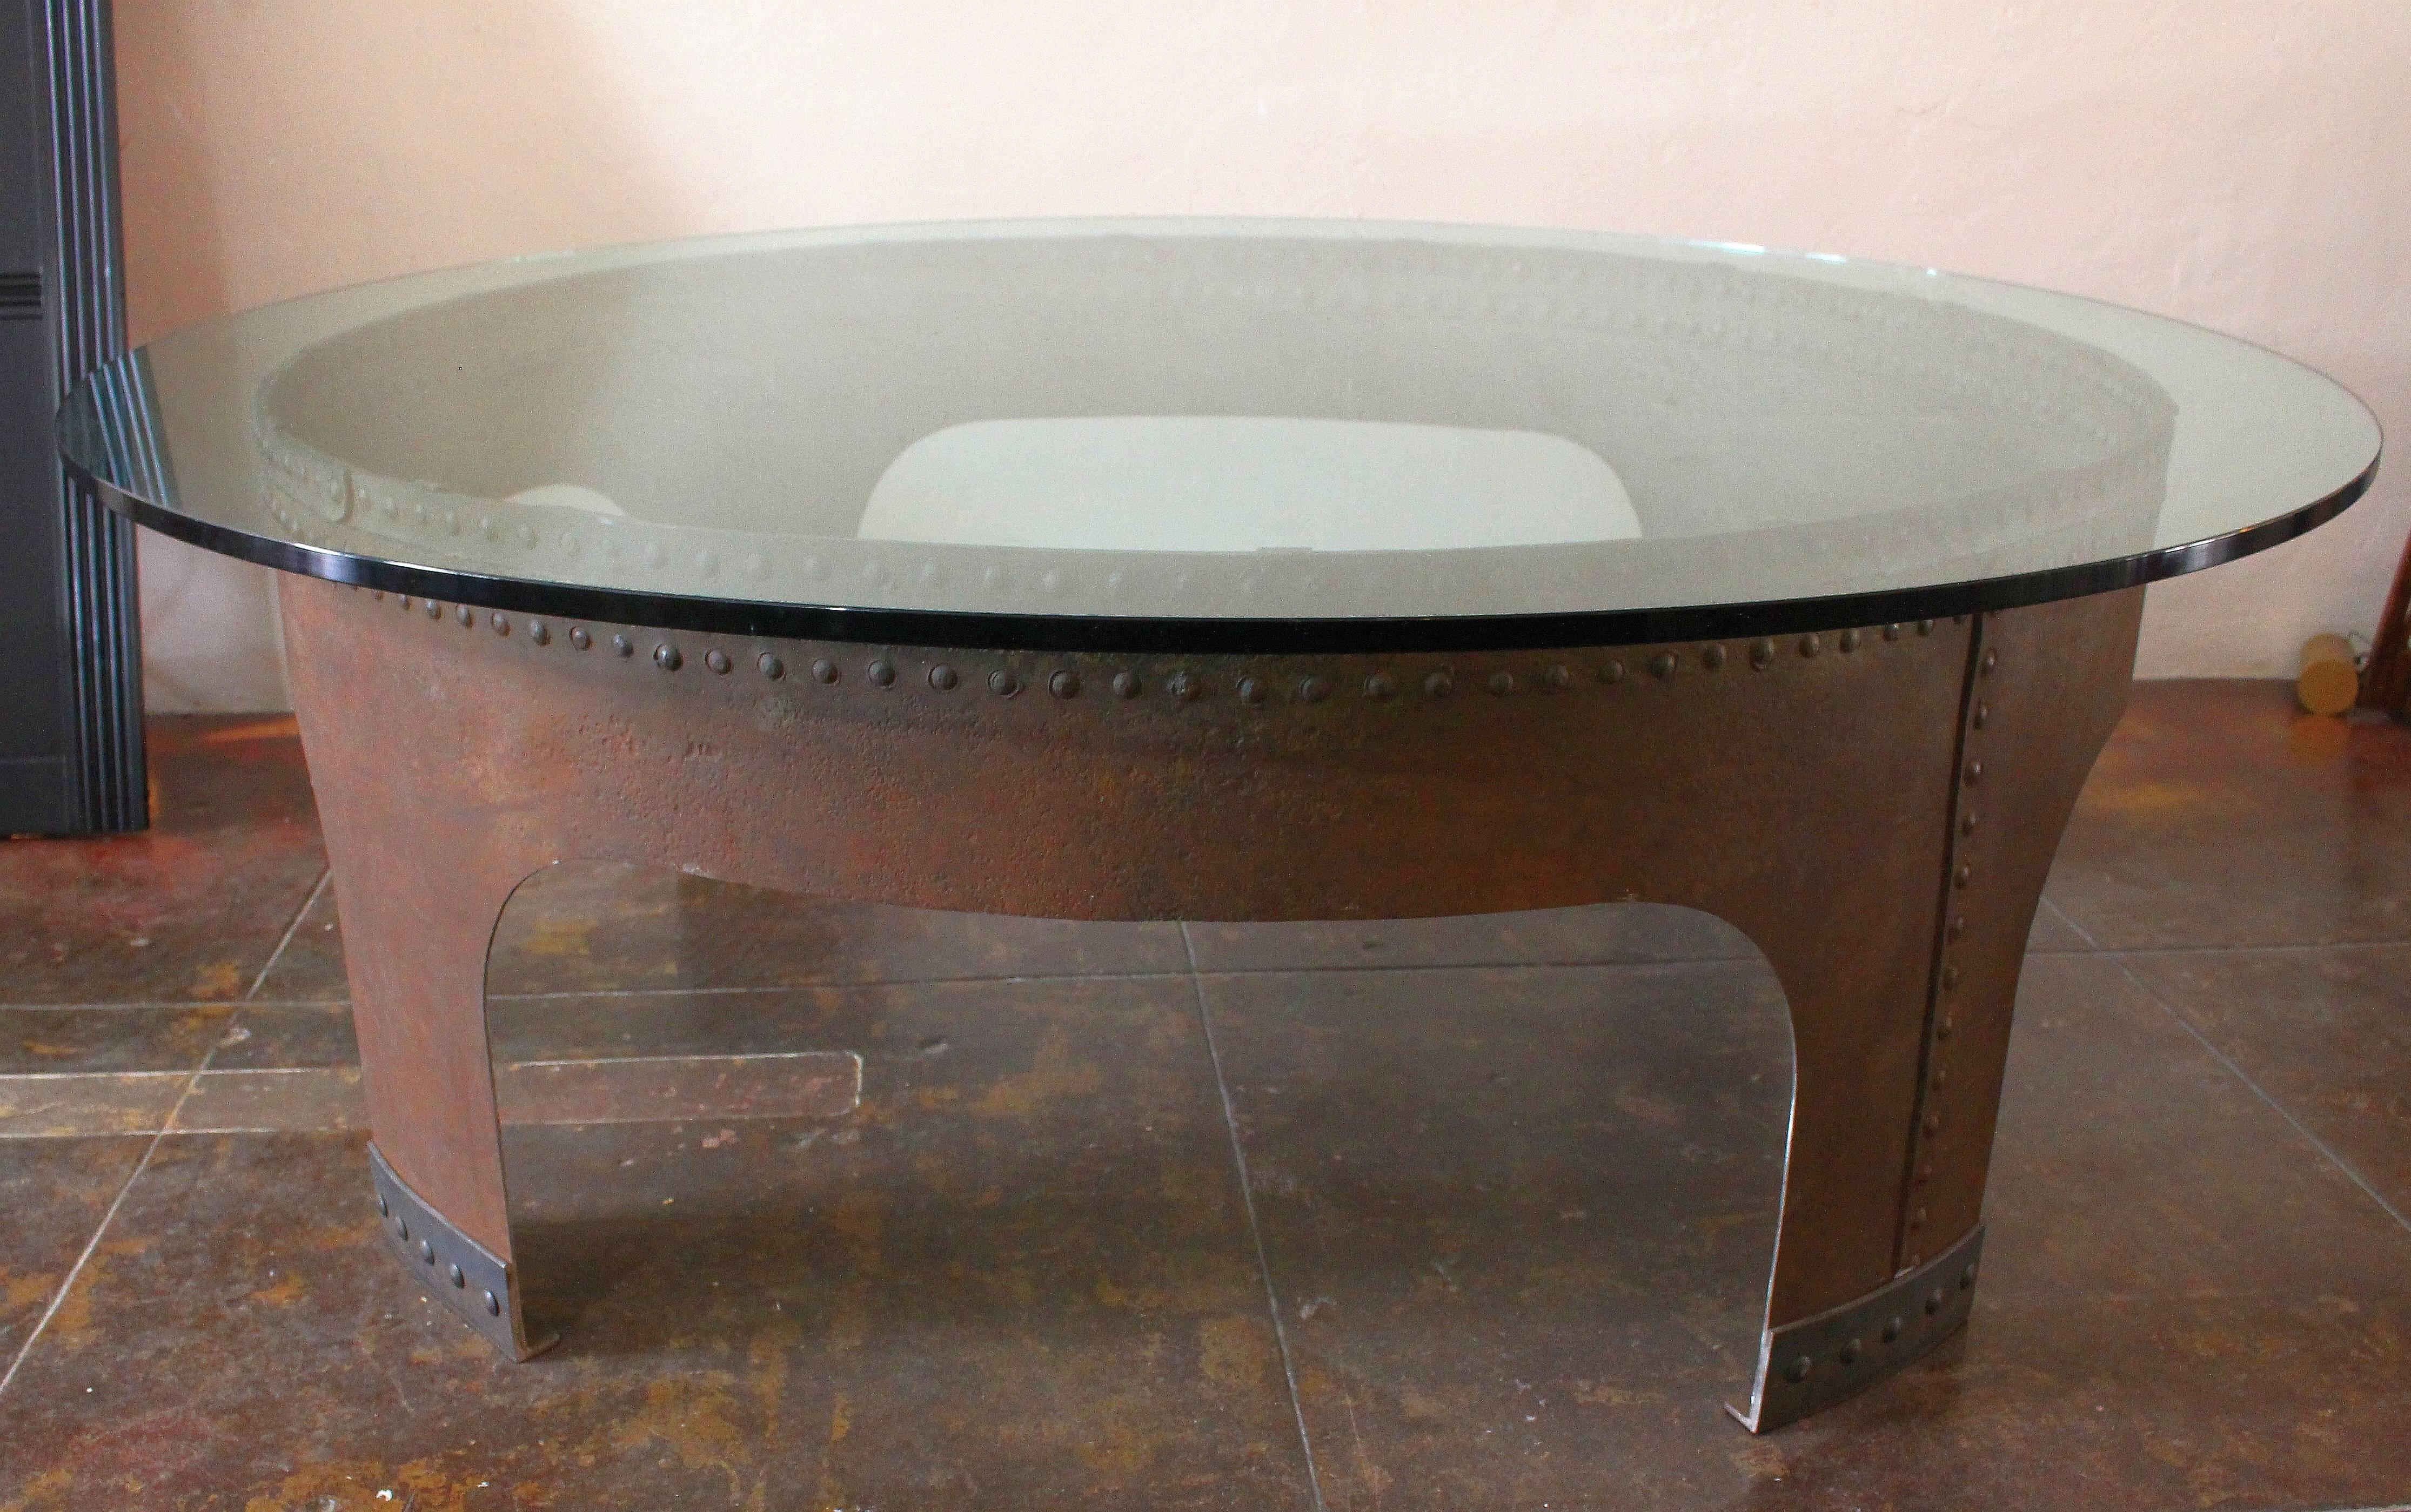 1970s creation of Gimo Fero a Venation artist. Round 3/4 of inch glass on 1918 military iron cistern base done by artisan black smith. Table is surround with ten Industrial stools in original condition. Table can be presented as a dining table,with